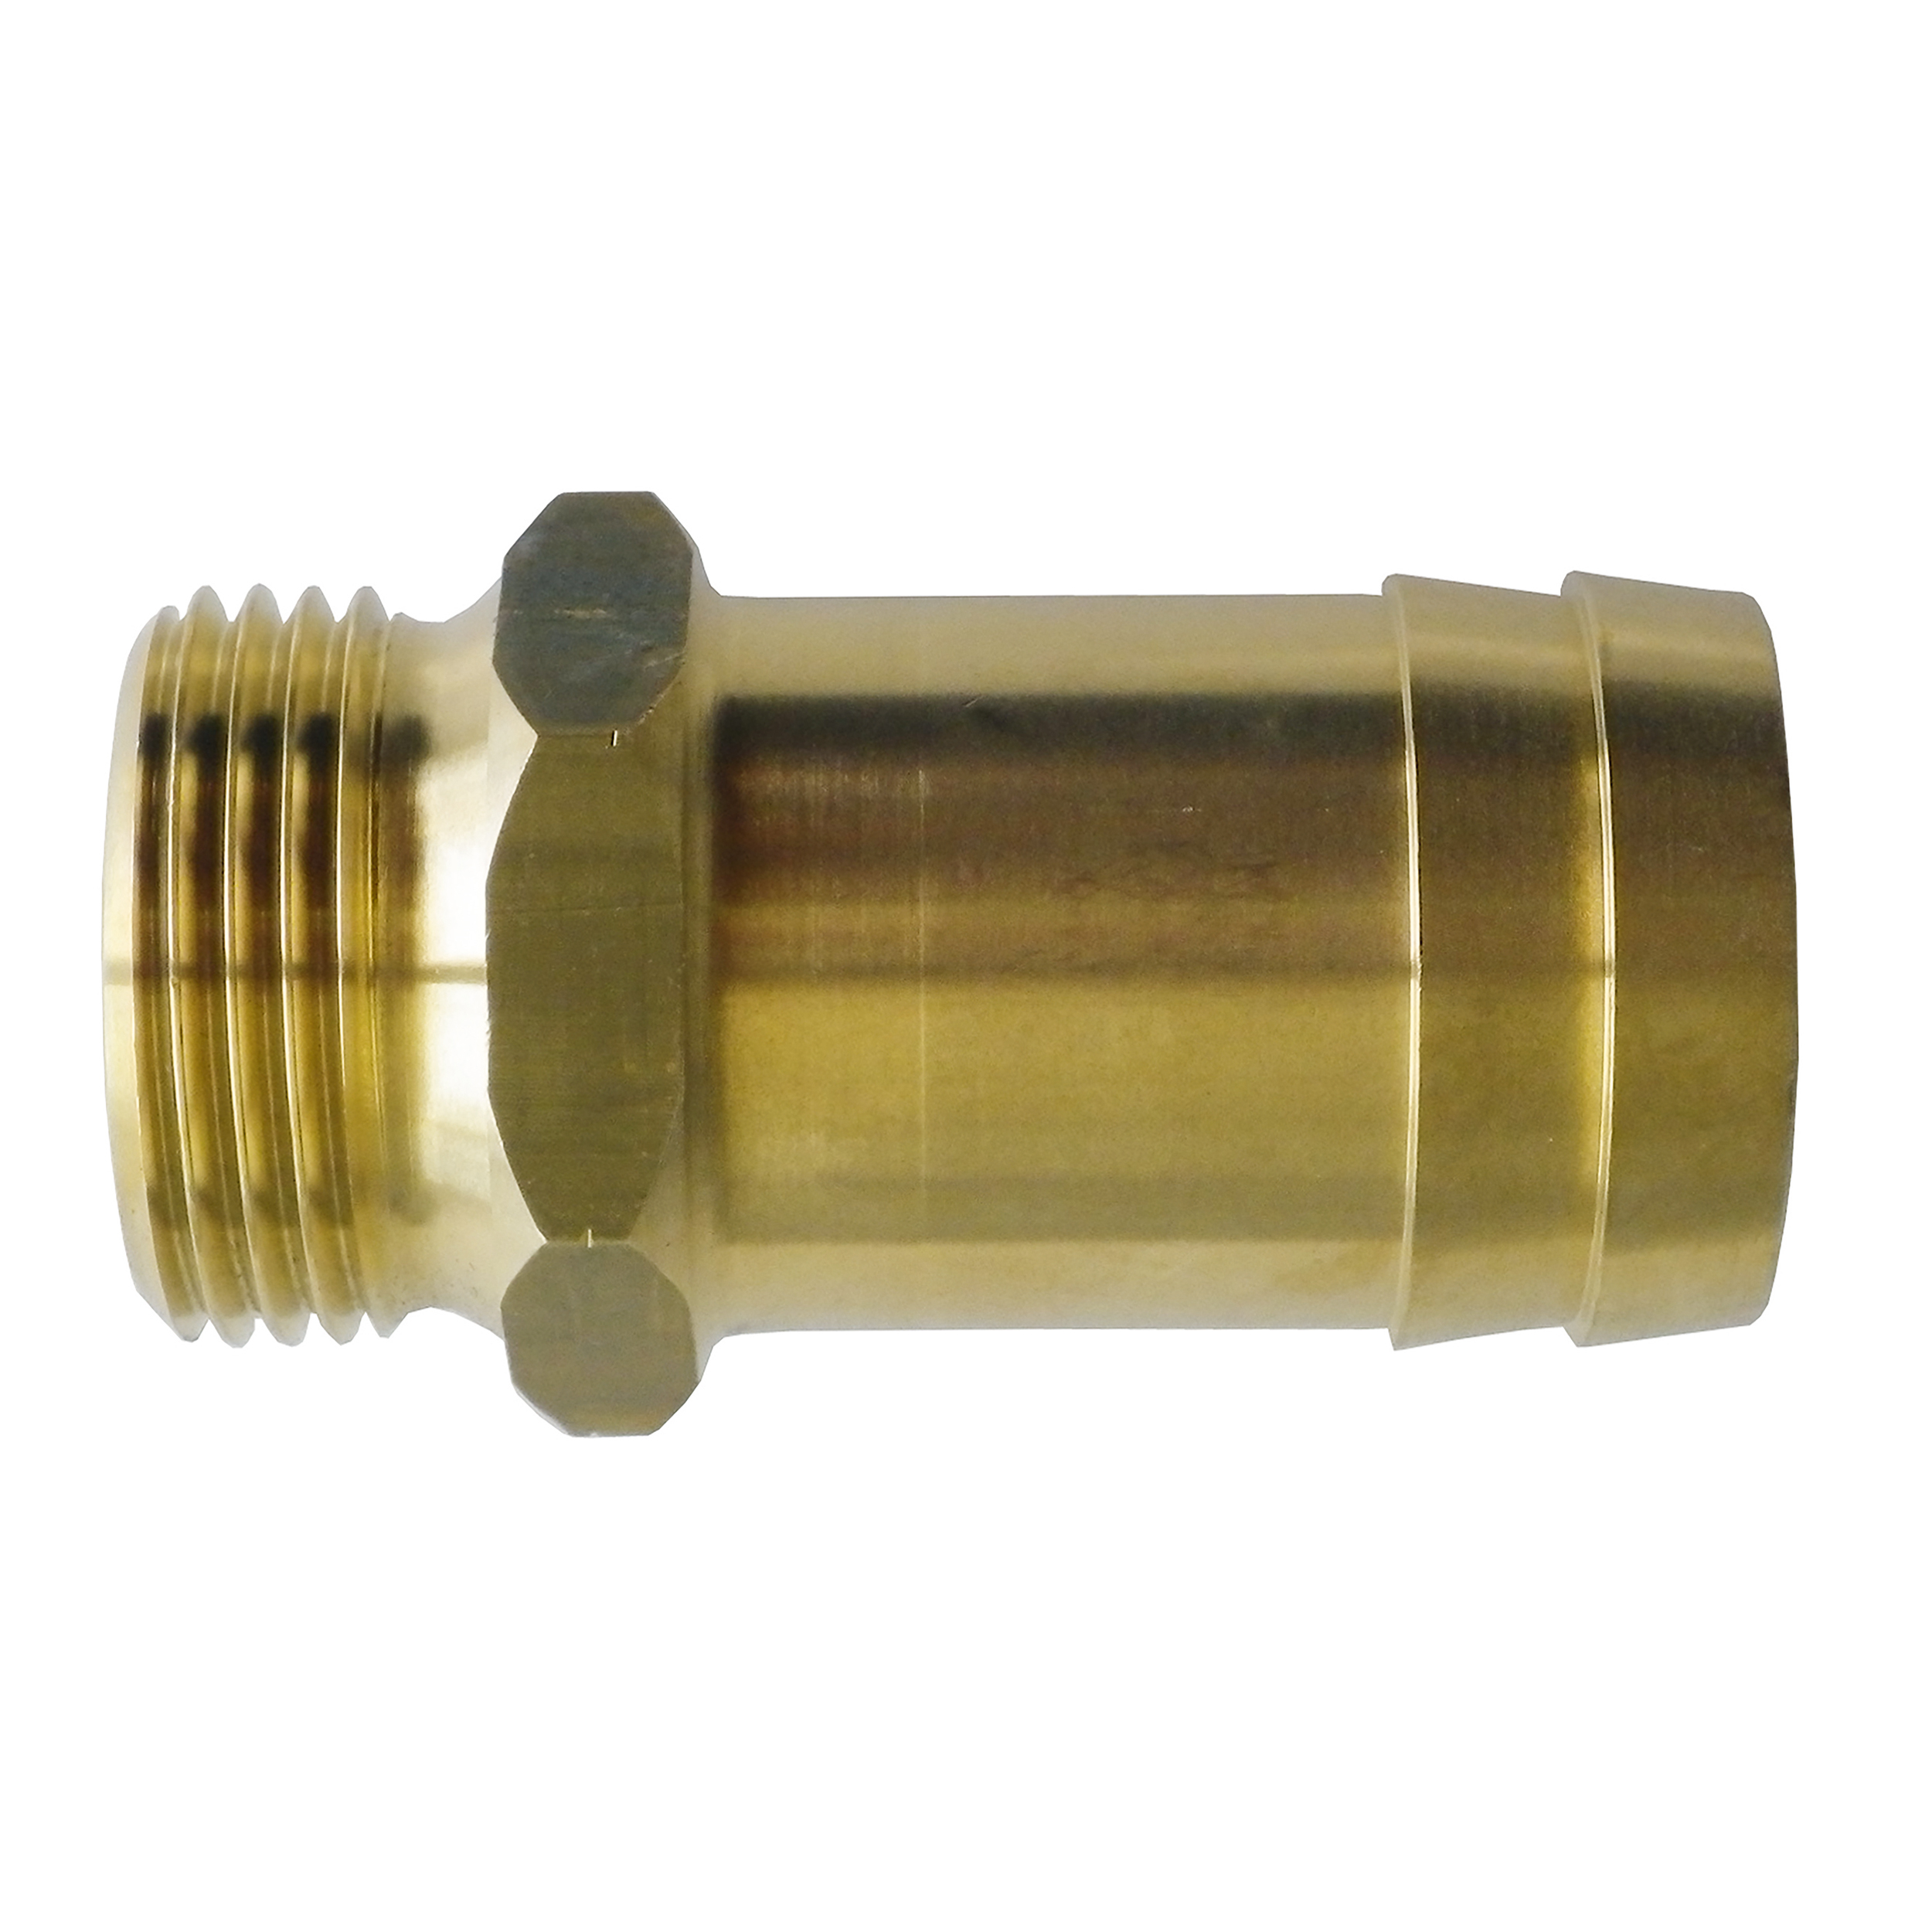 Threaded hose connector, G⅛ male, DN 9, AF 14 mm, length: 37 mm, inner cone 45° (DIN 3852-2), MOP 580 psi, one-piece, brass